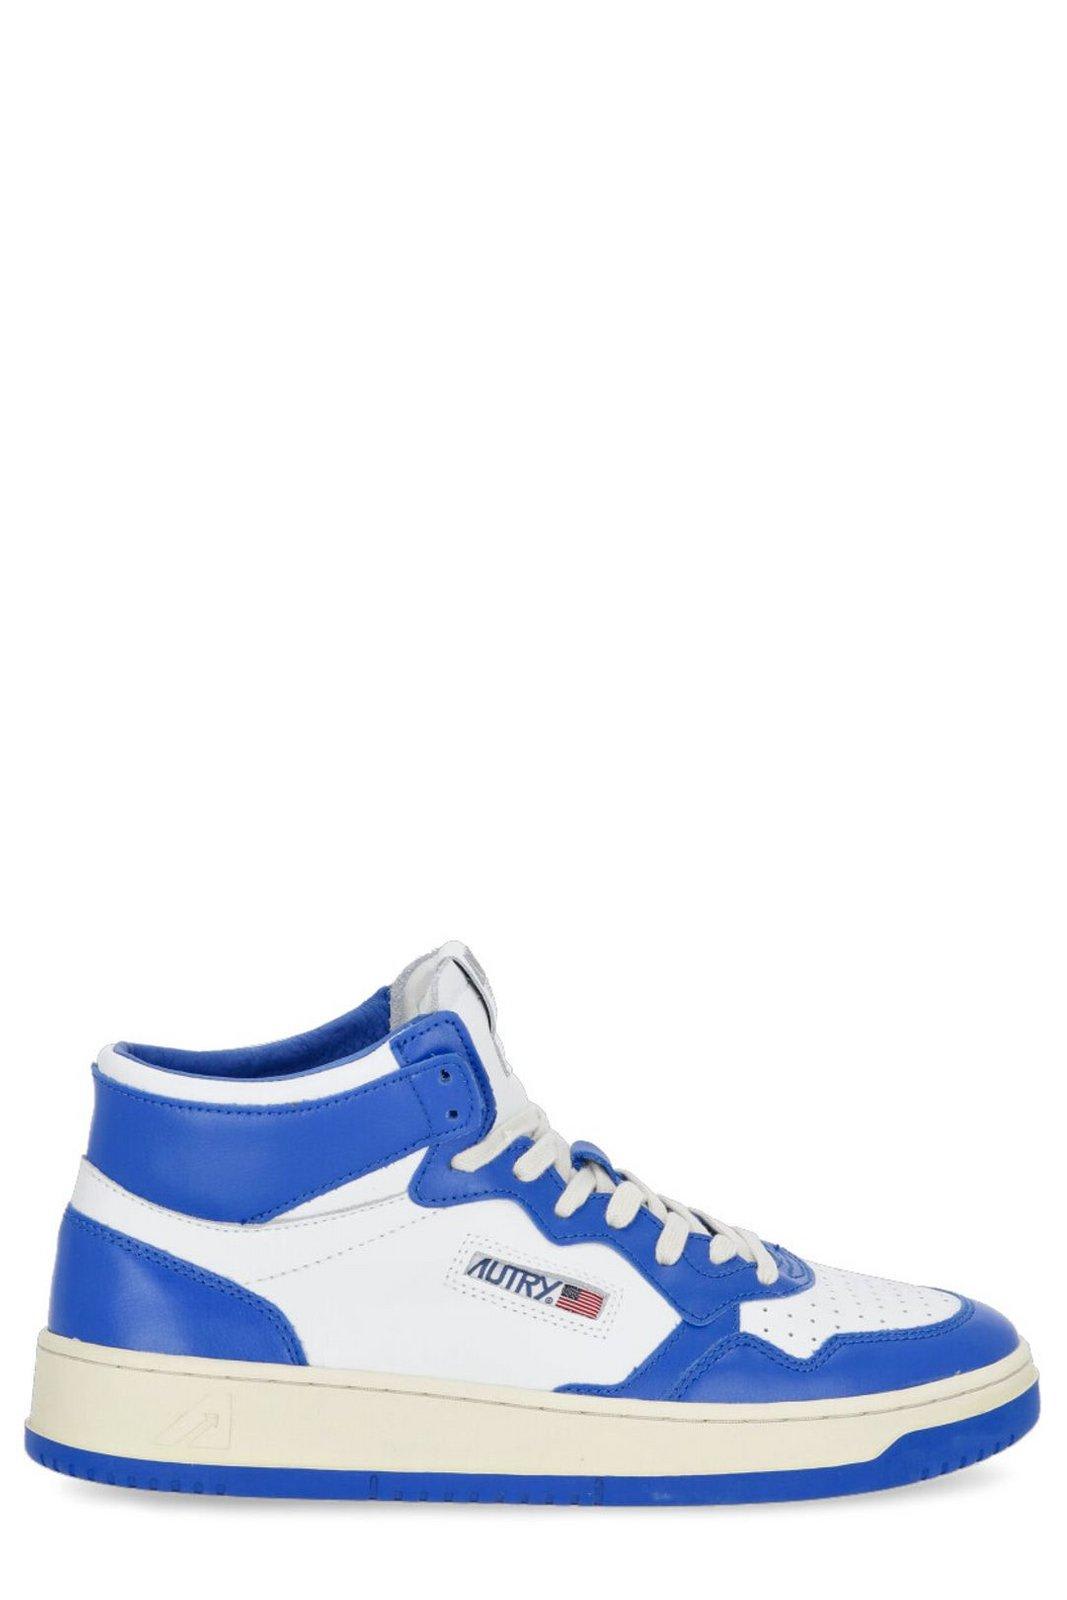 Shop Autry Colourblock Hight-top Lace-up Sneakers In Blue